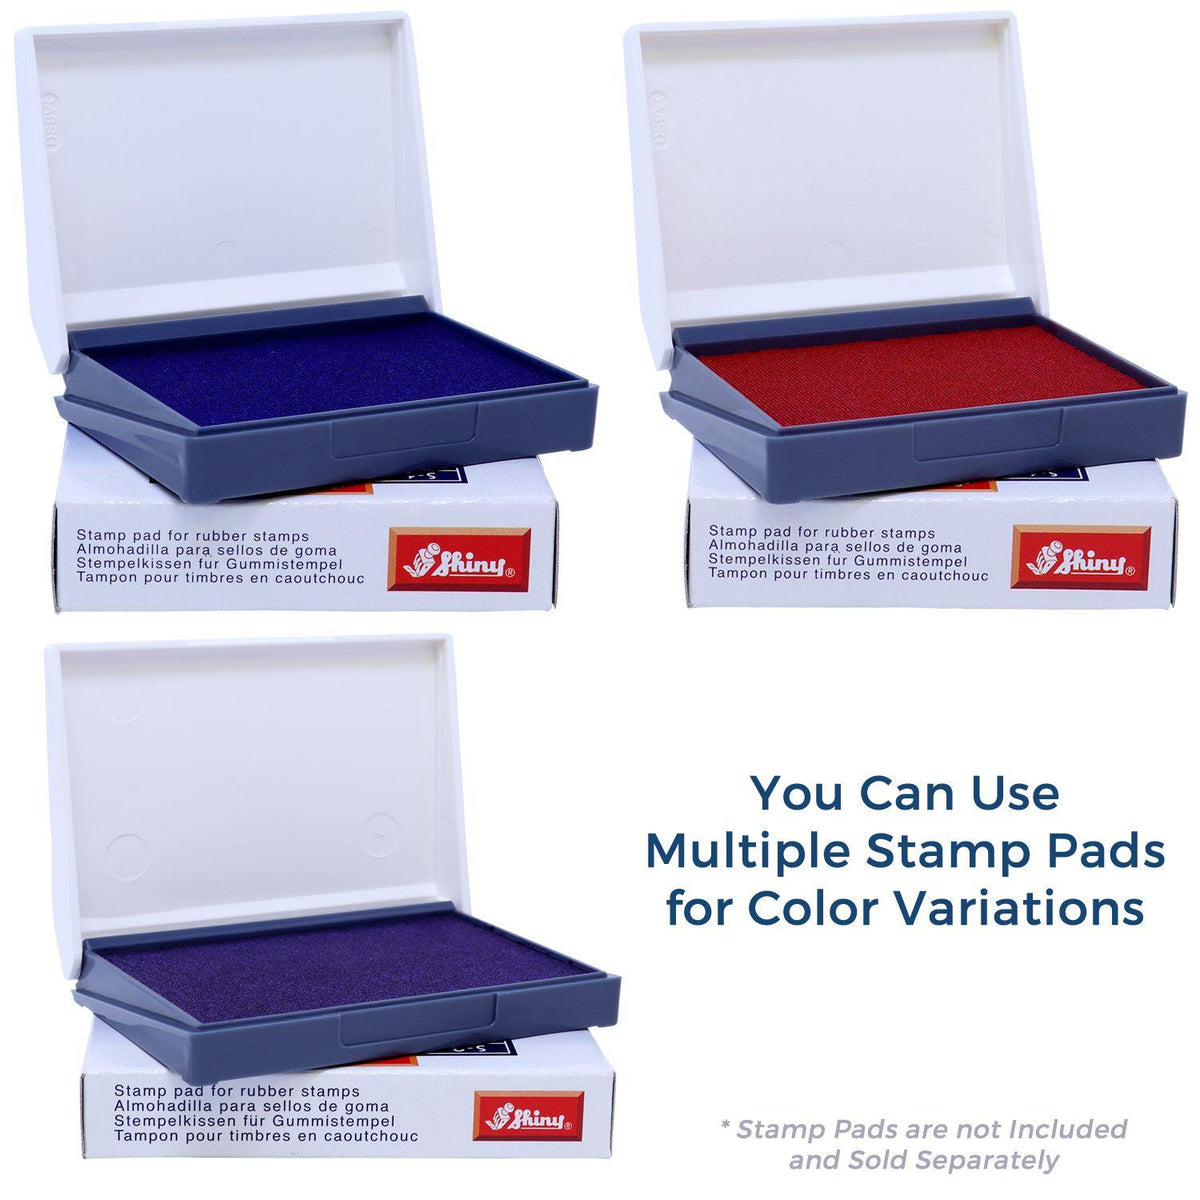 Stamp Pads for Large Pagado Rubber Stamp Available